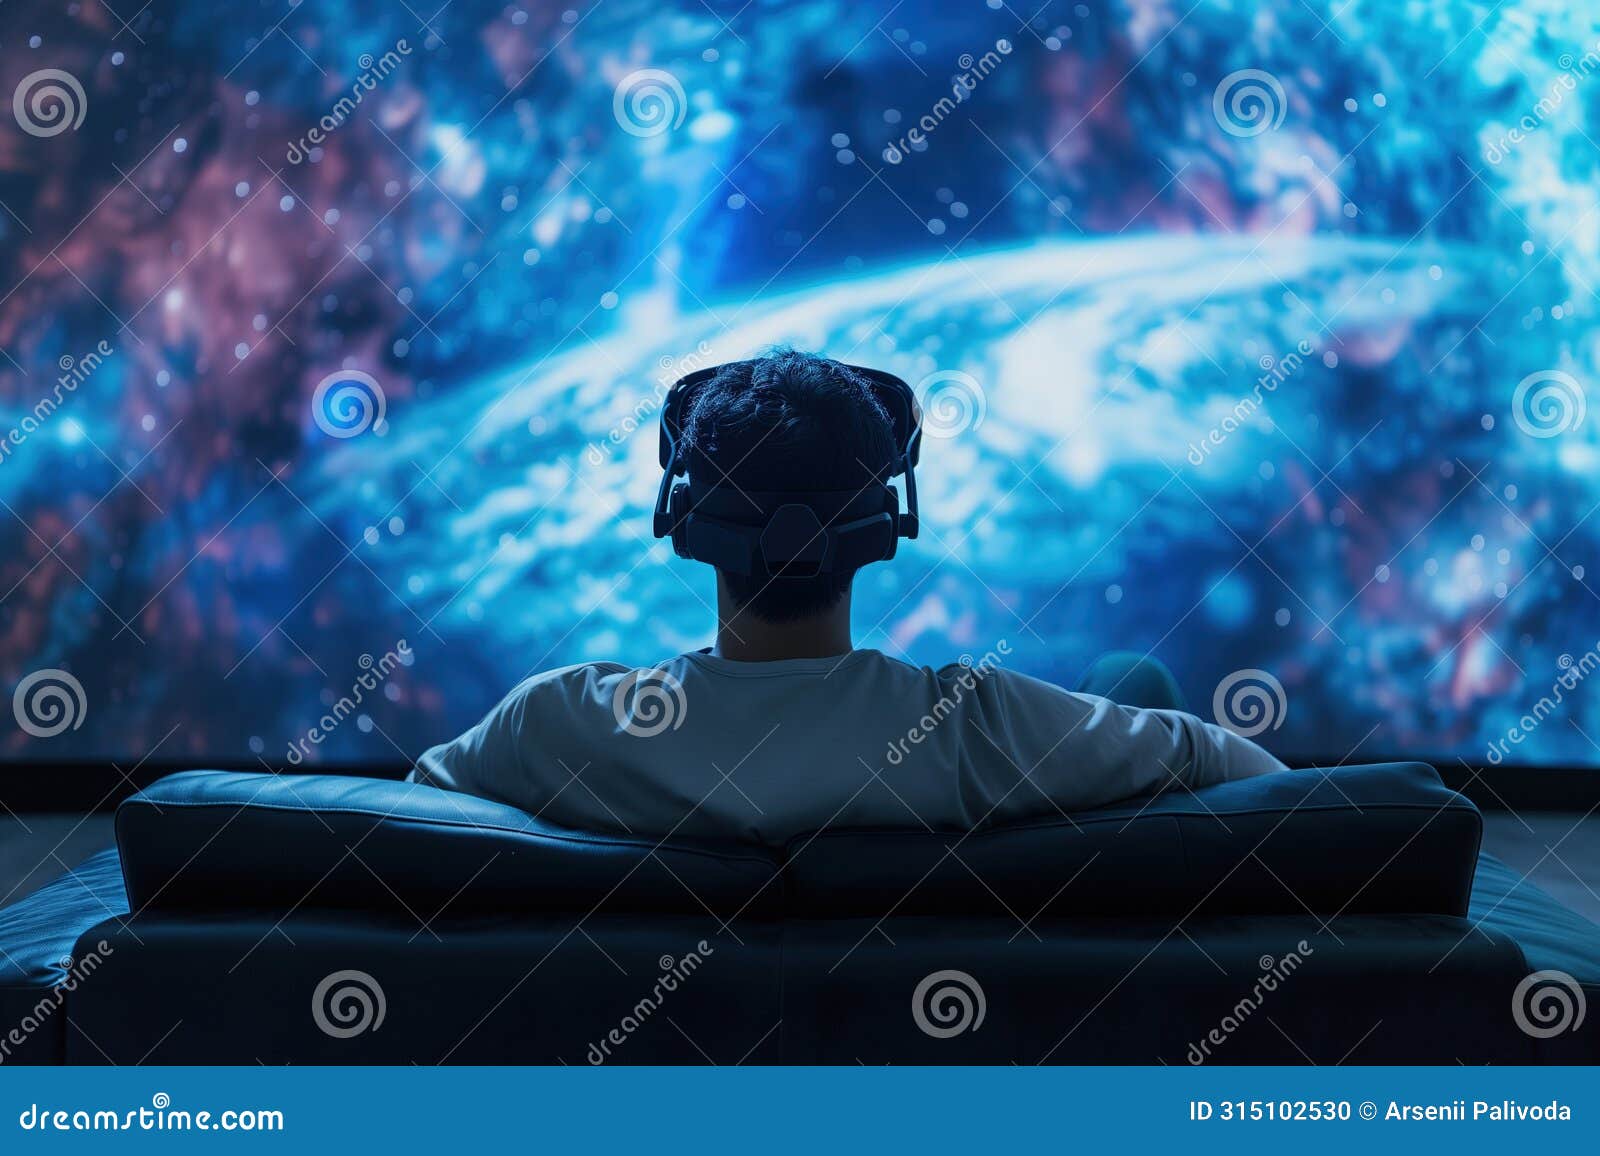 rear view of man in vr headset explores cosmic scenery in spatial augmented reality